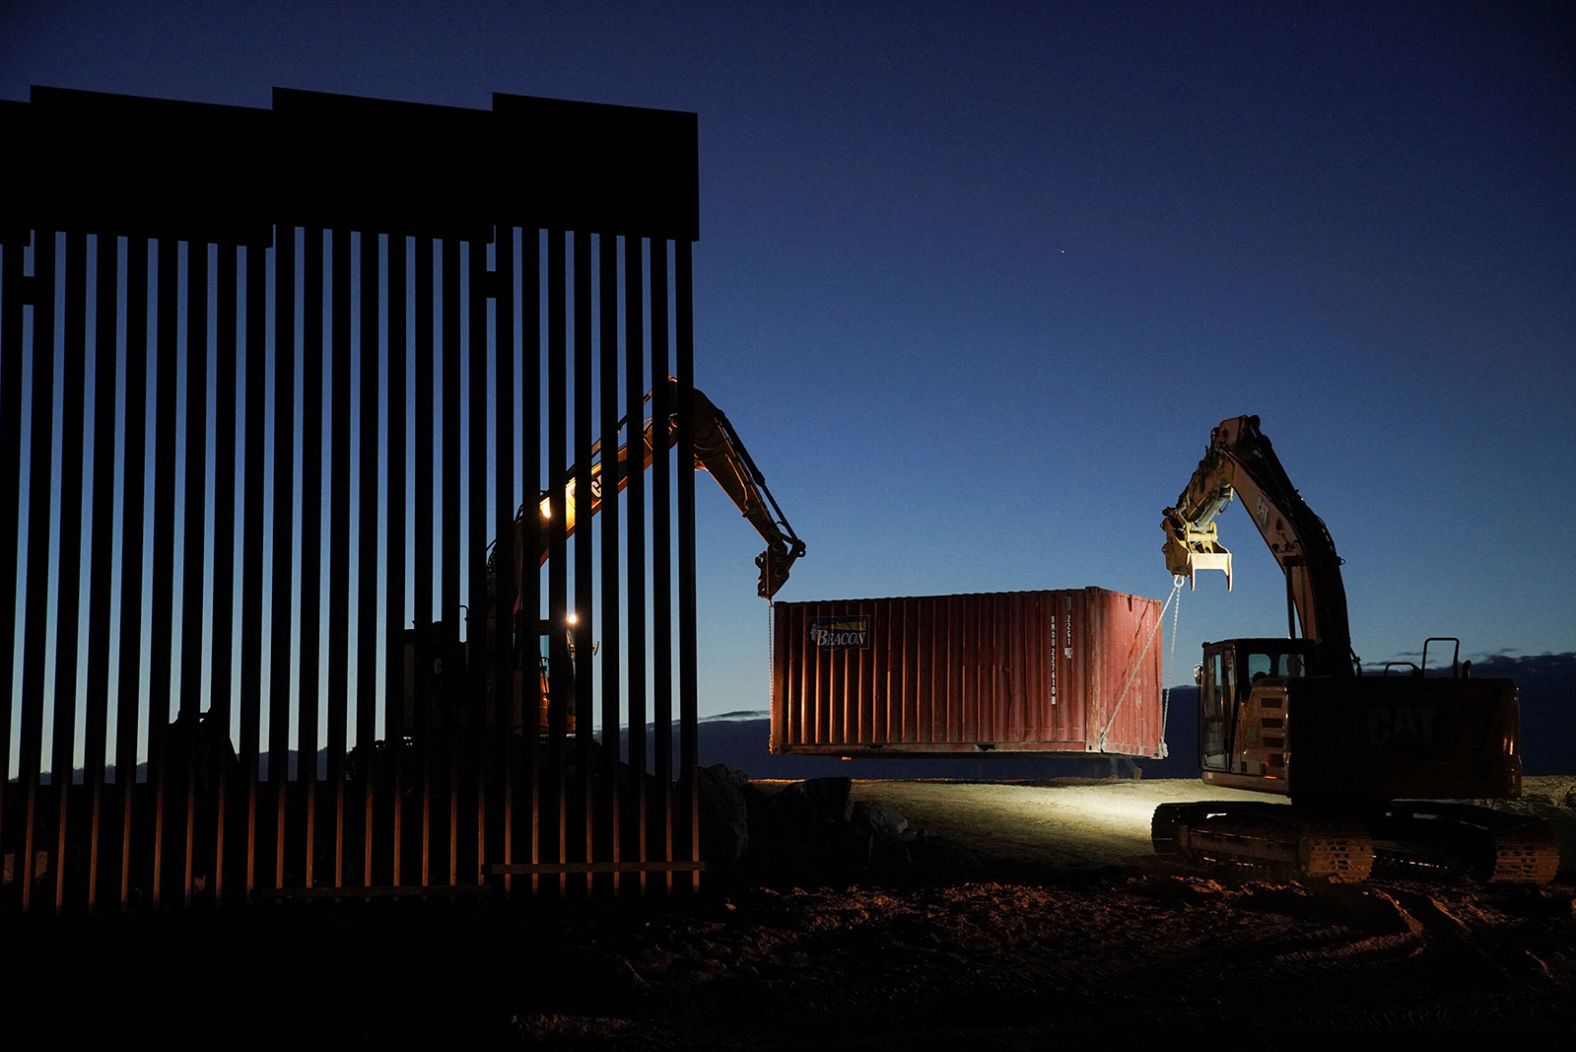 A construction crew removes shipping containers in Yuma County, Arizona, early on Tuesday, January 3. The state of Arizona agreed to remove the shipping containers, which were placed as a makeshift wall along its shared border with Mexico, <a href="index.php?page=&url=https%3A%2F%2Fwww.cnn.com%2F2022%2F12%2F22%2Fus%2Fborder-wall-shipping-container-arizona-lawsuit%2Findex.html" target="_blank">as part of an ongoing lawsuit</a>.